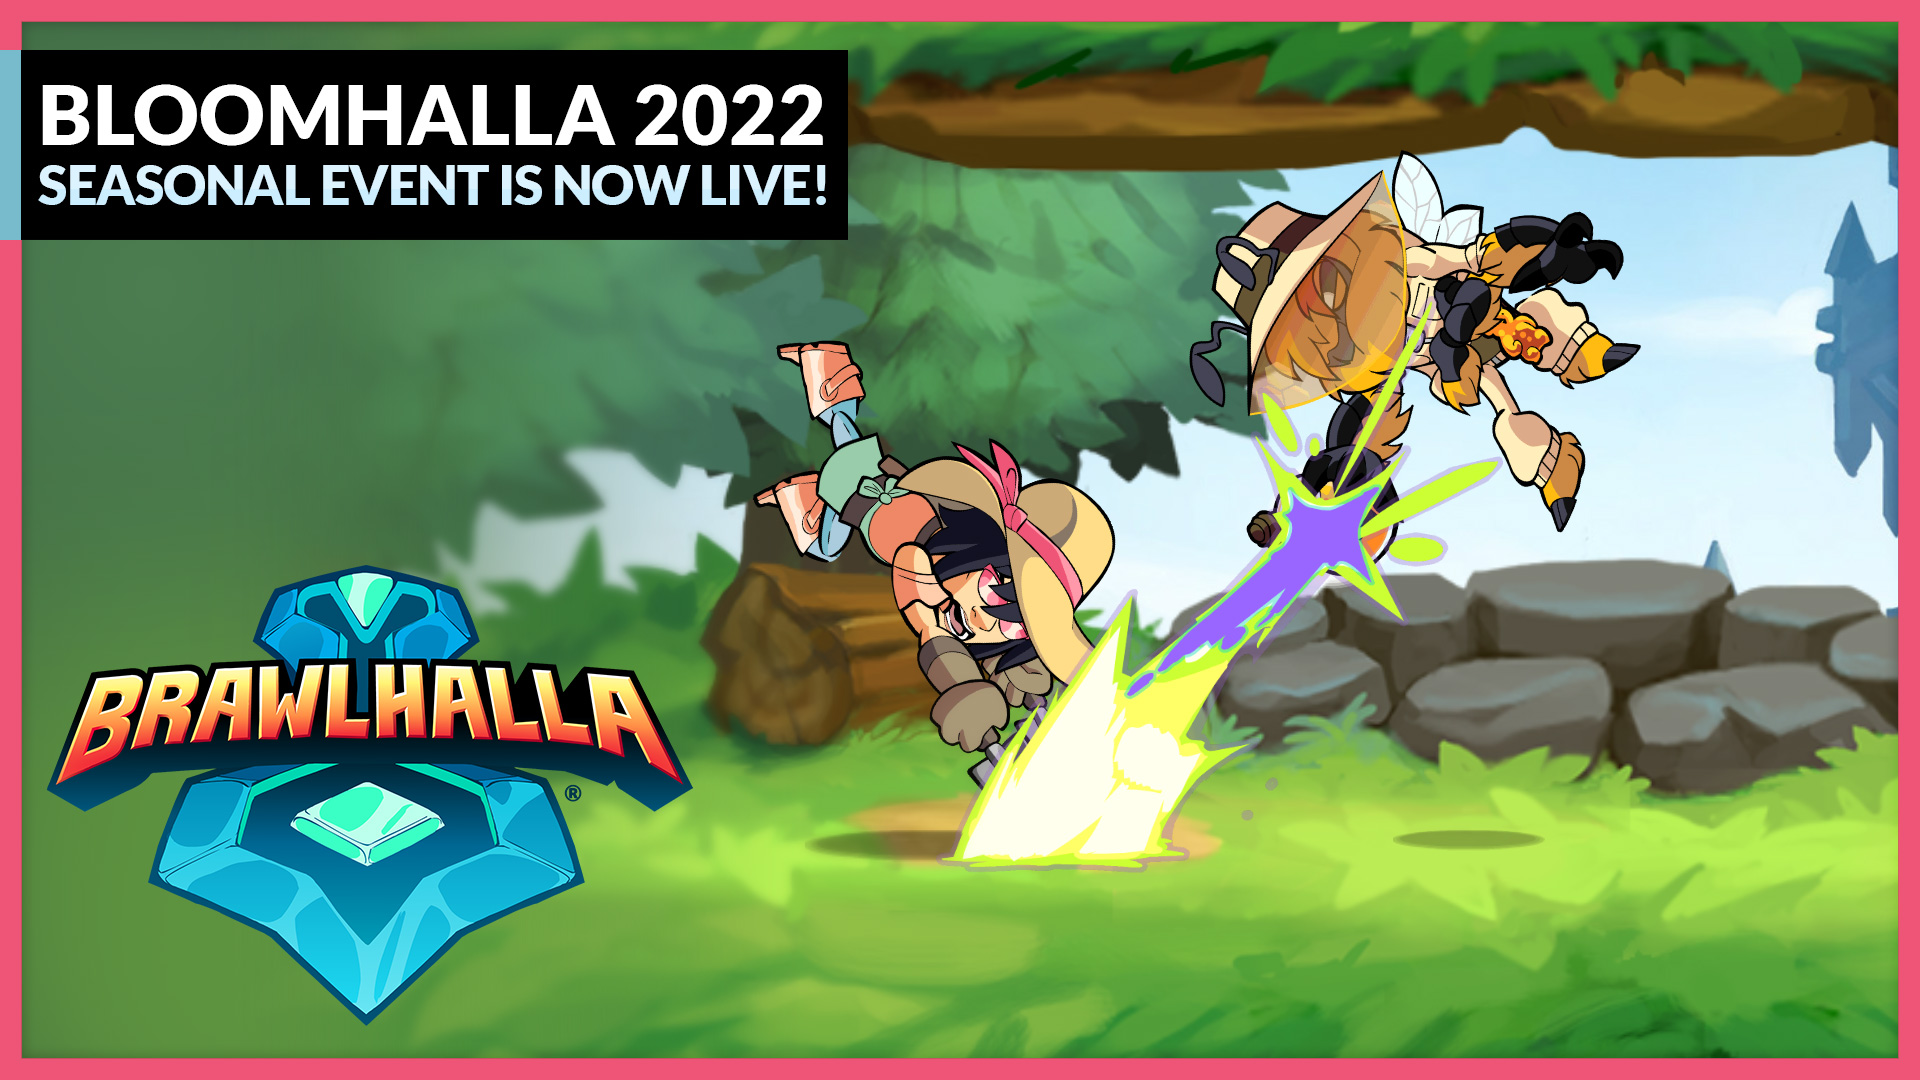 Welcome to Bloomhalla 2022!